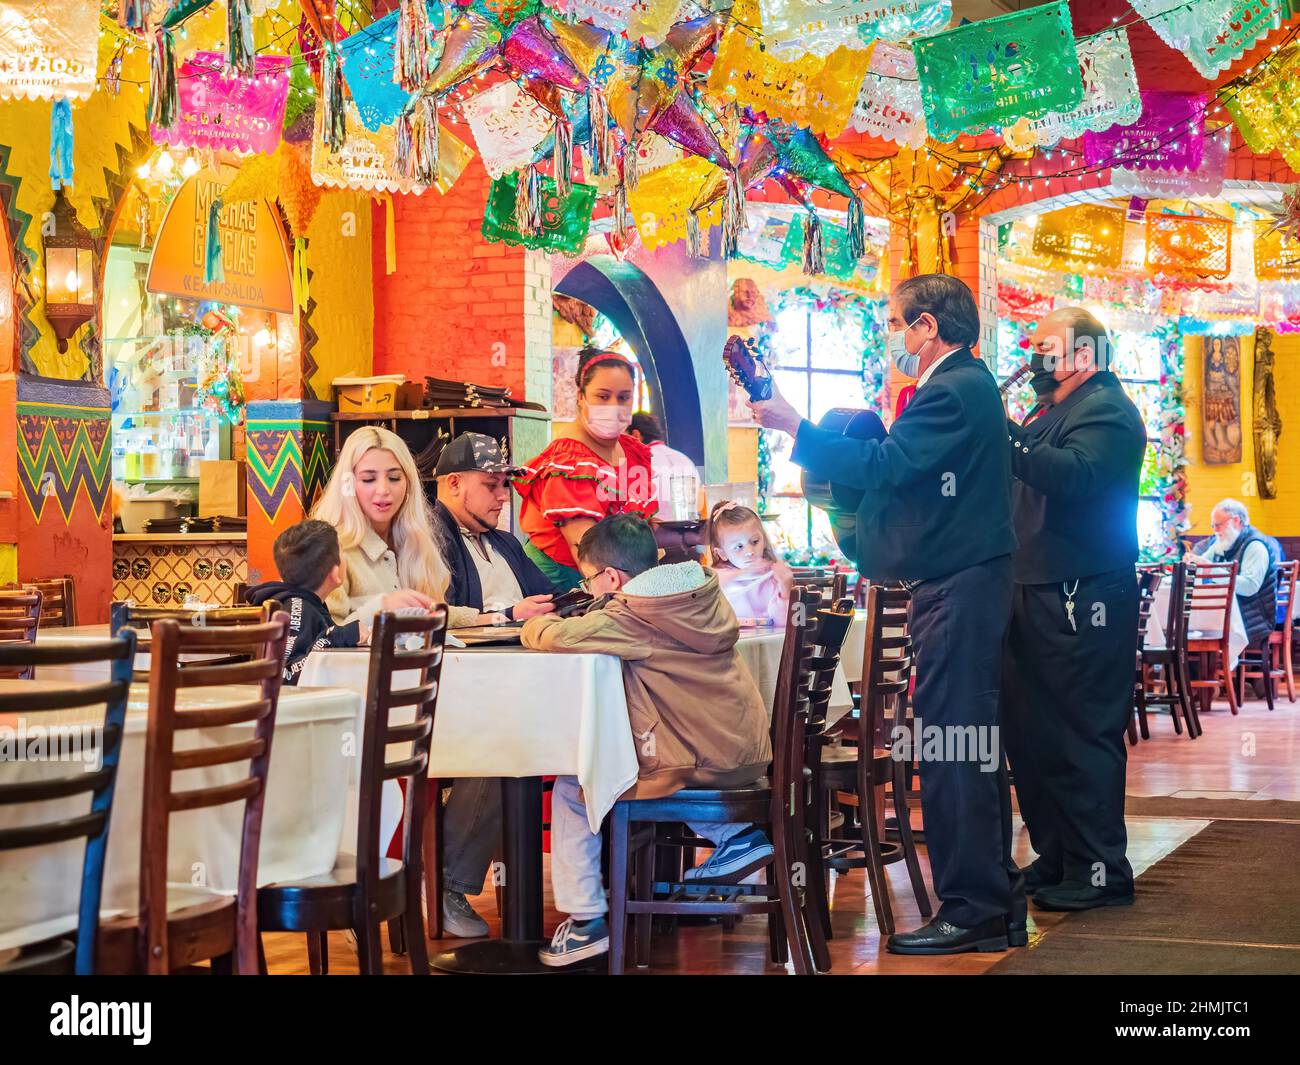 Texas, FEB 2 2022 - People doing musical performance in the El Mercado Snack Bar Stock Photo